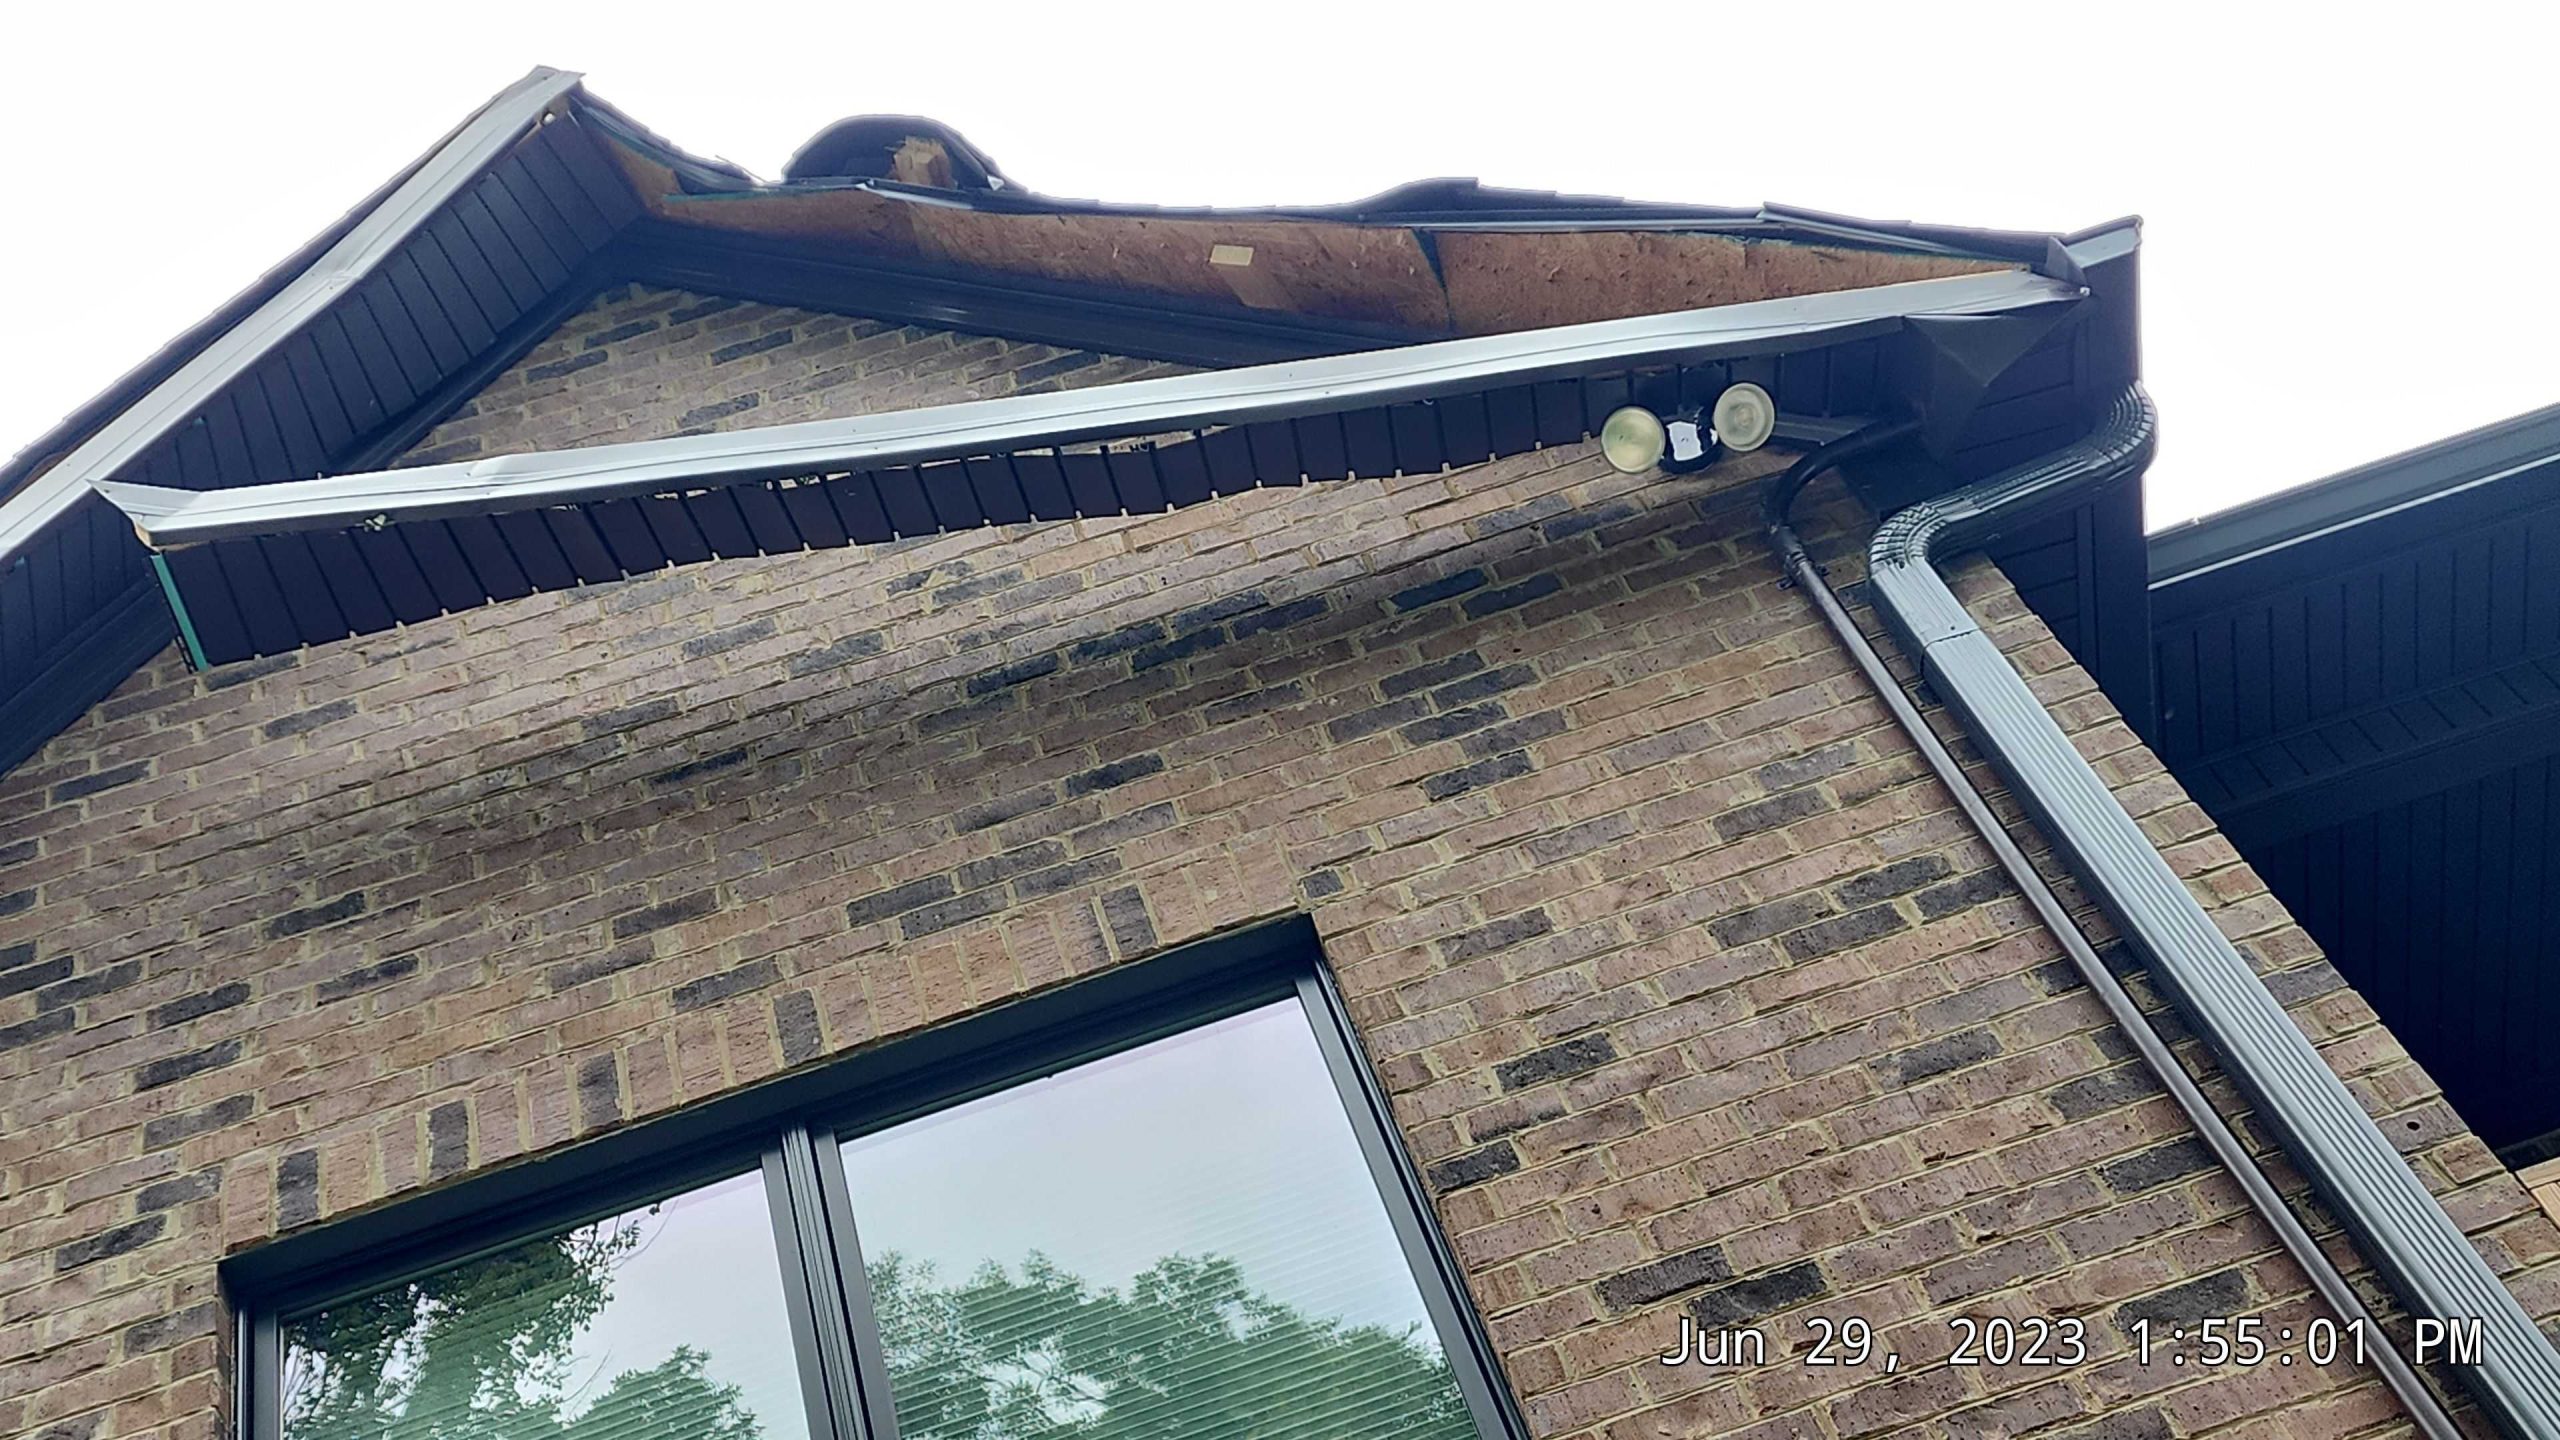 Broken, detached fascia and soffit exposing boards.